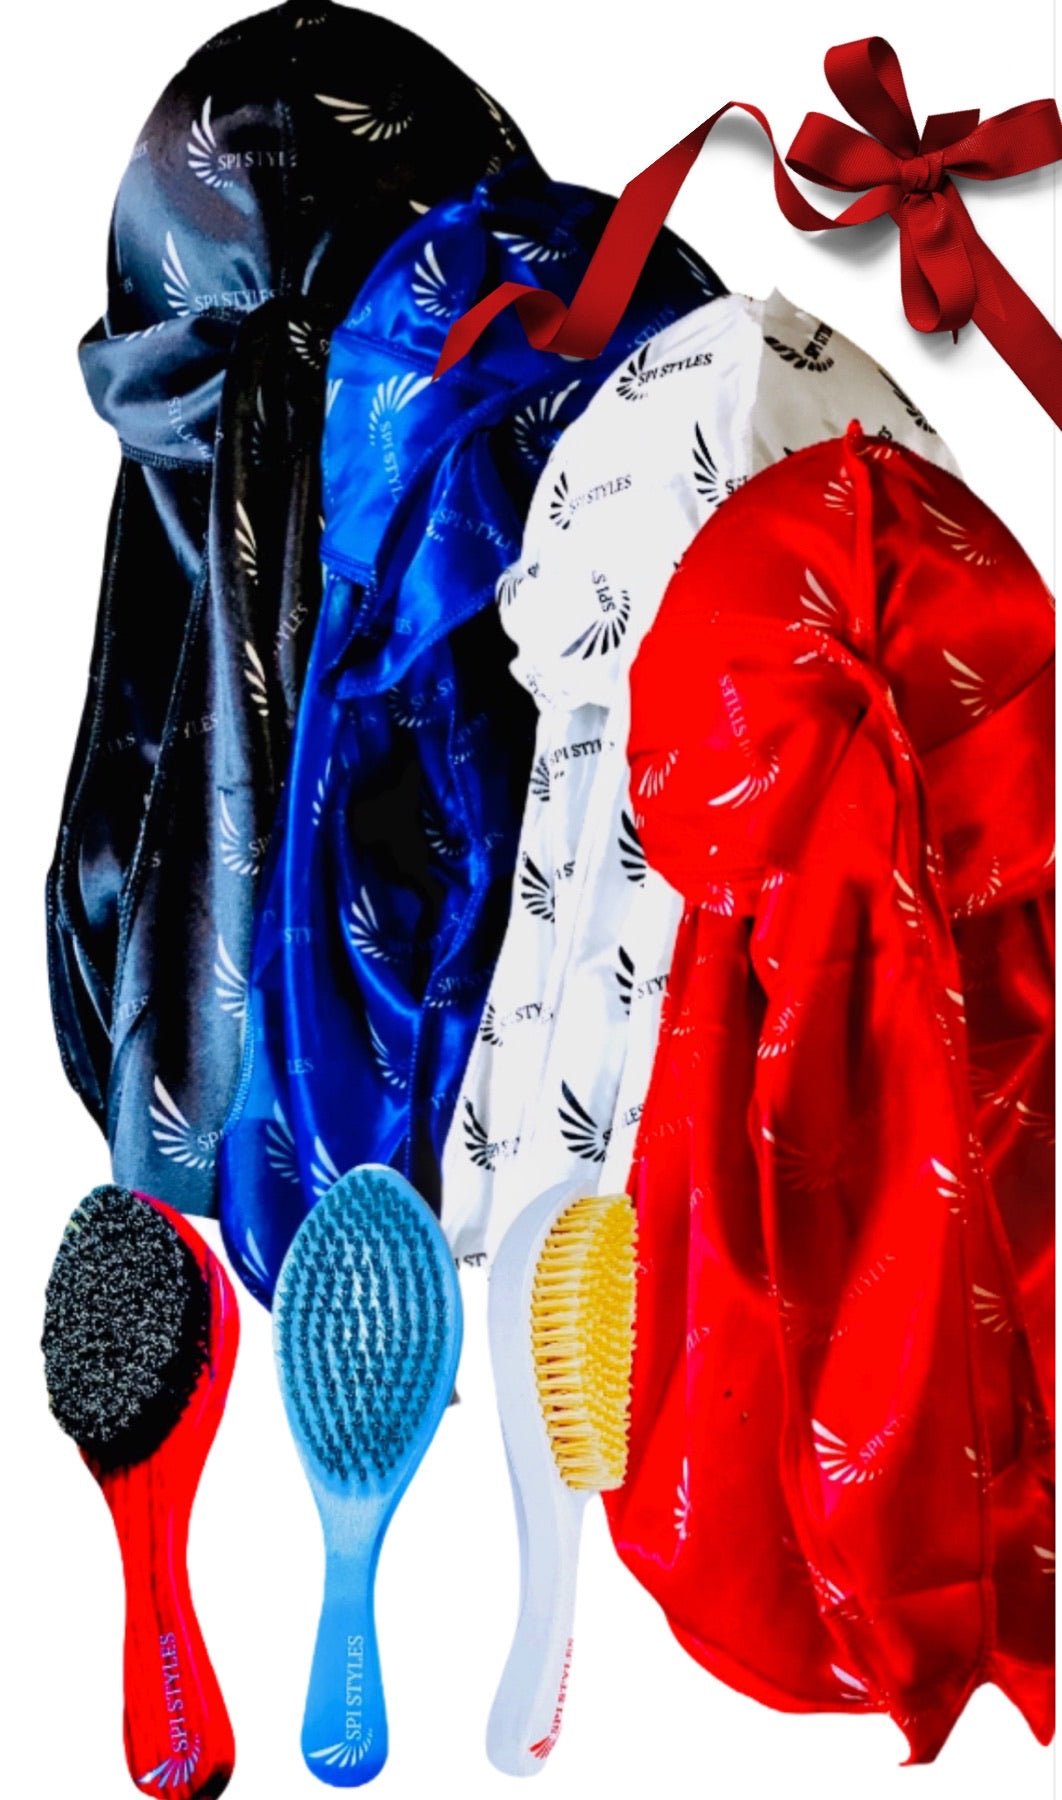 SPI STYLES WAVE BRUSH COLLECTION with 4 Designer Durags! - SPI Styles